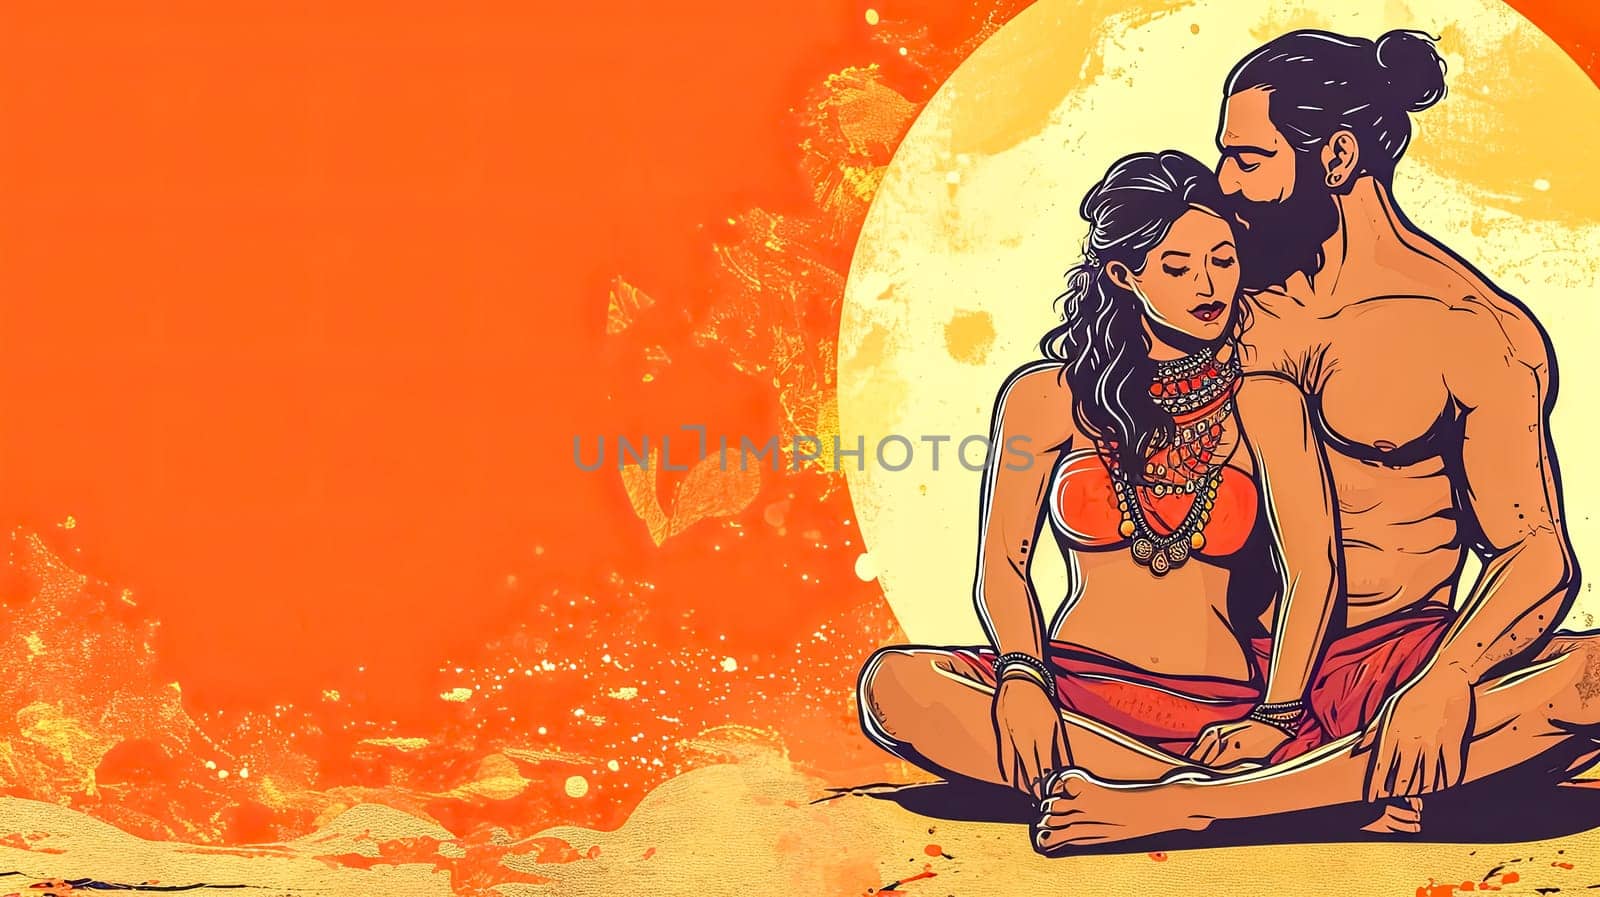 couple in a serene embrace, evoking themes of love and intimacy. The vibrant orange backdrop suggests warmth and passion. copy space